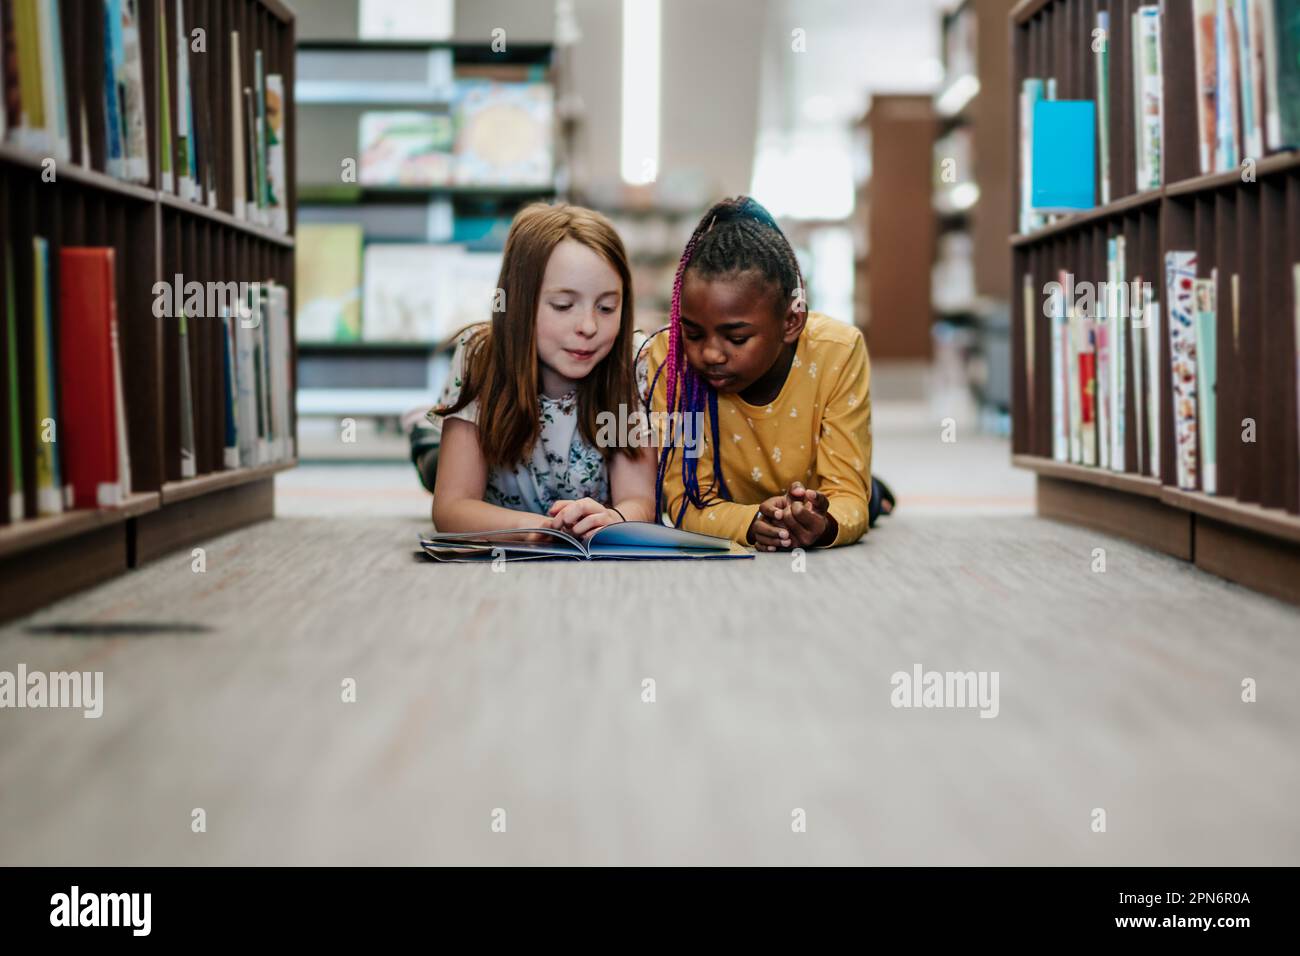 Young girls reading a library book together inside Stock Photo